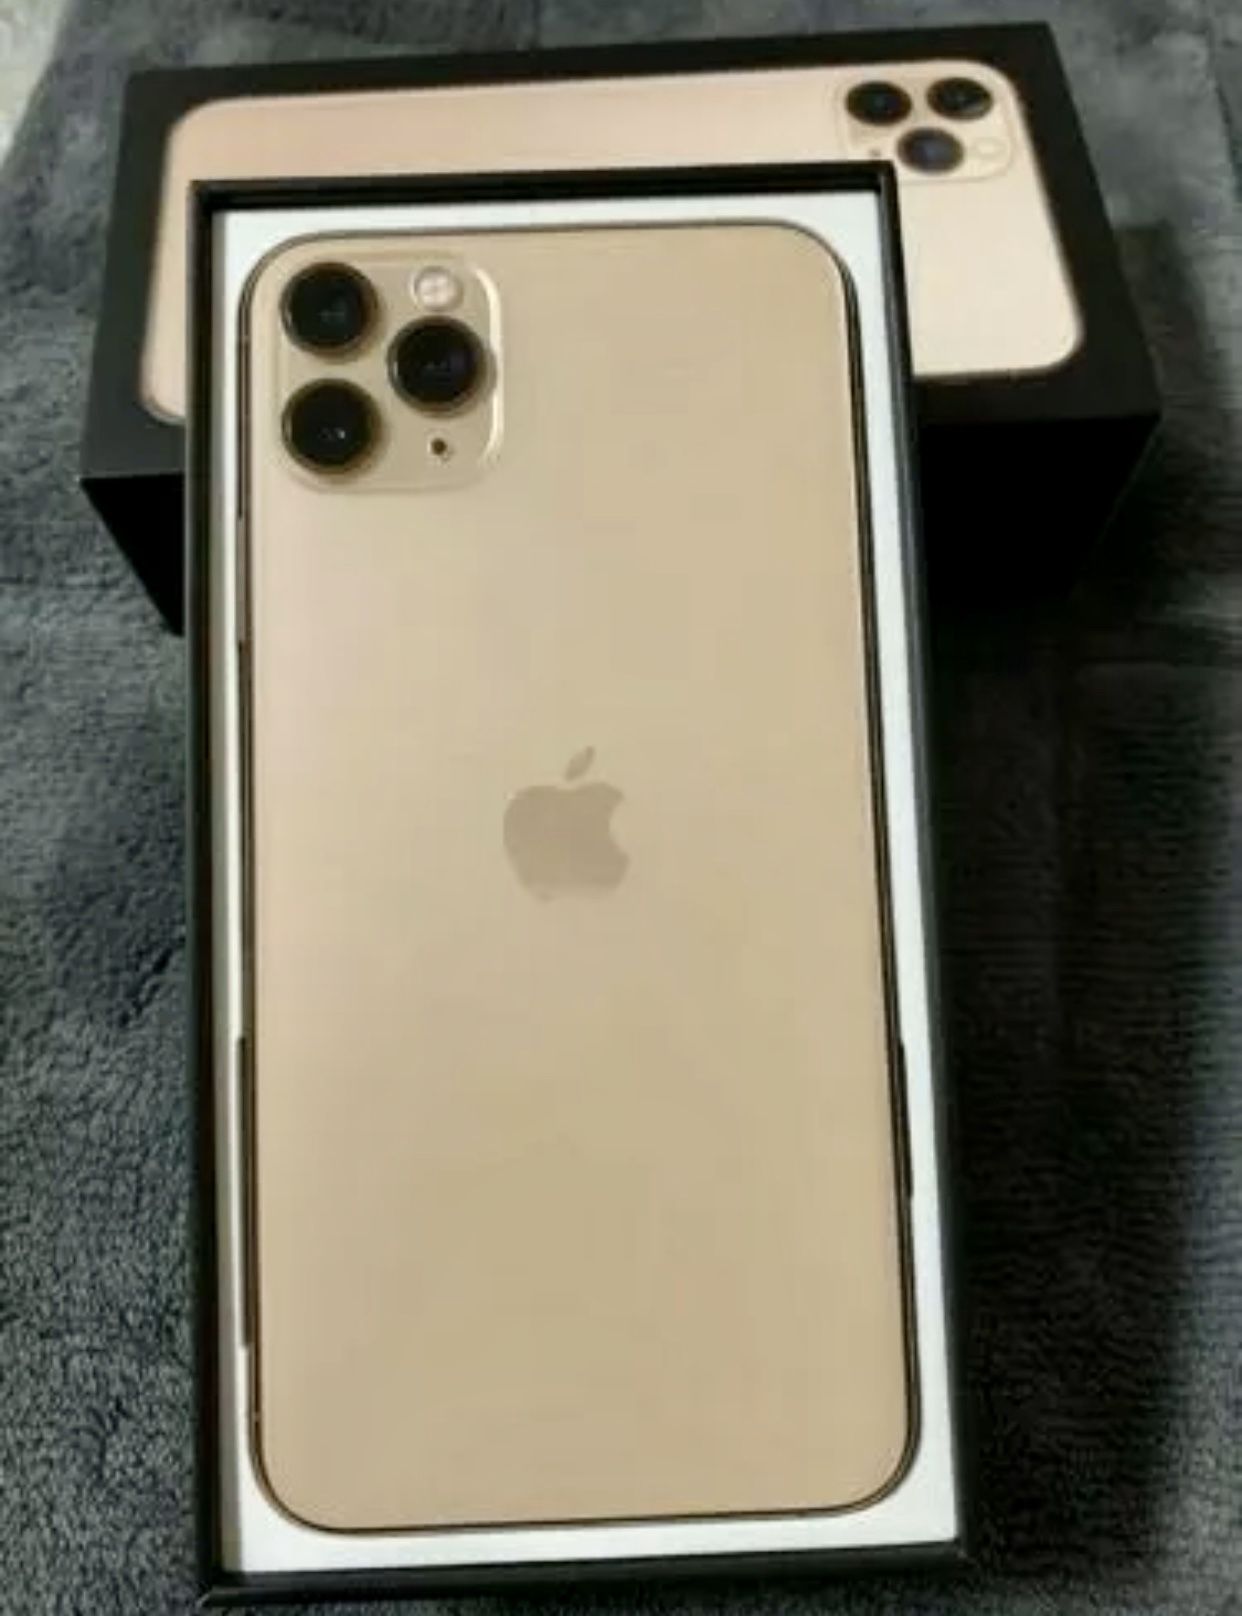 iPhone 11 Pro Max 256gb in Gold